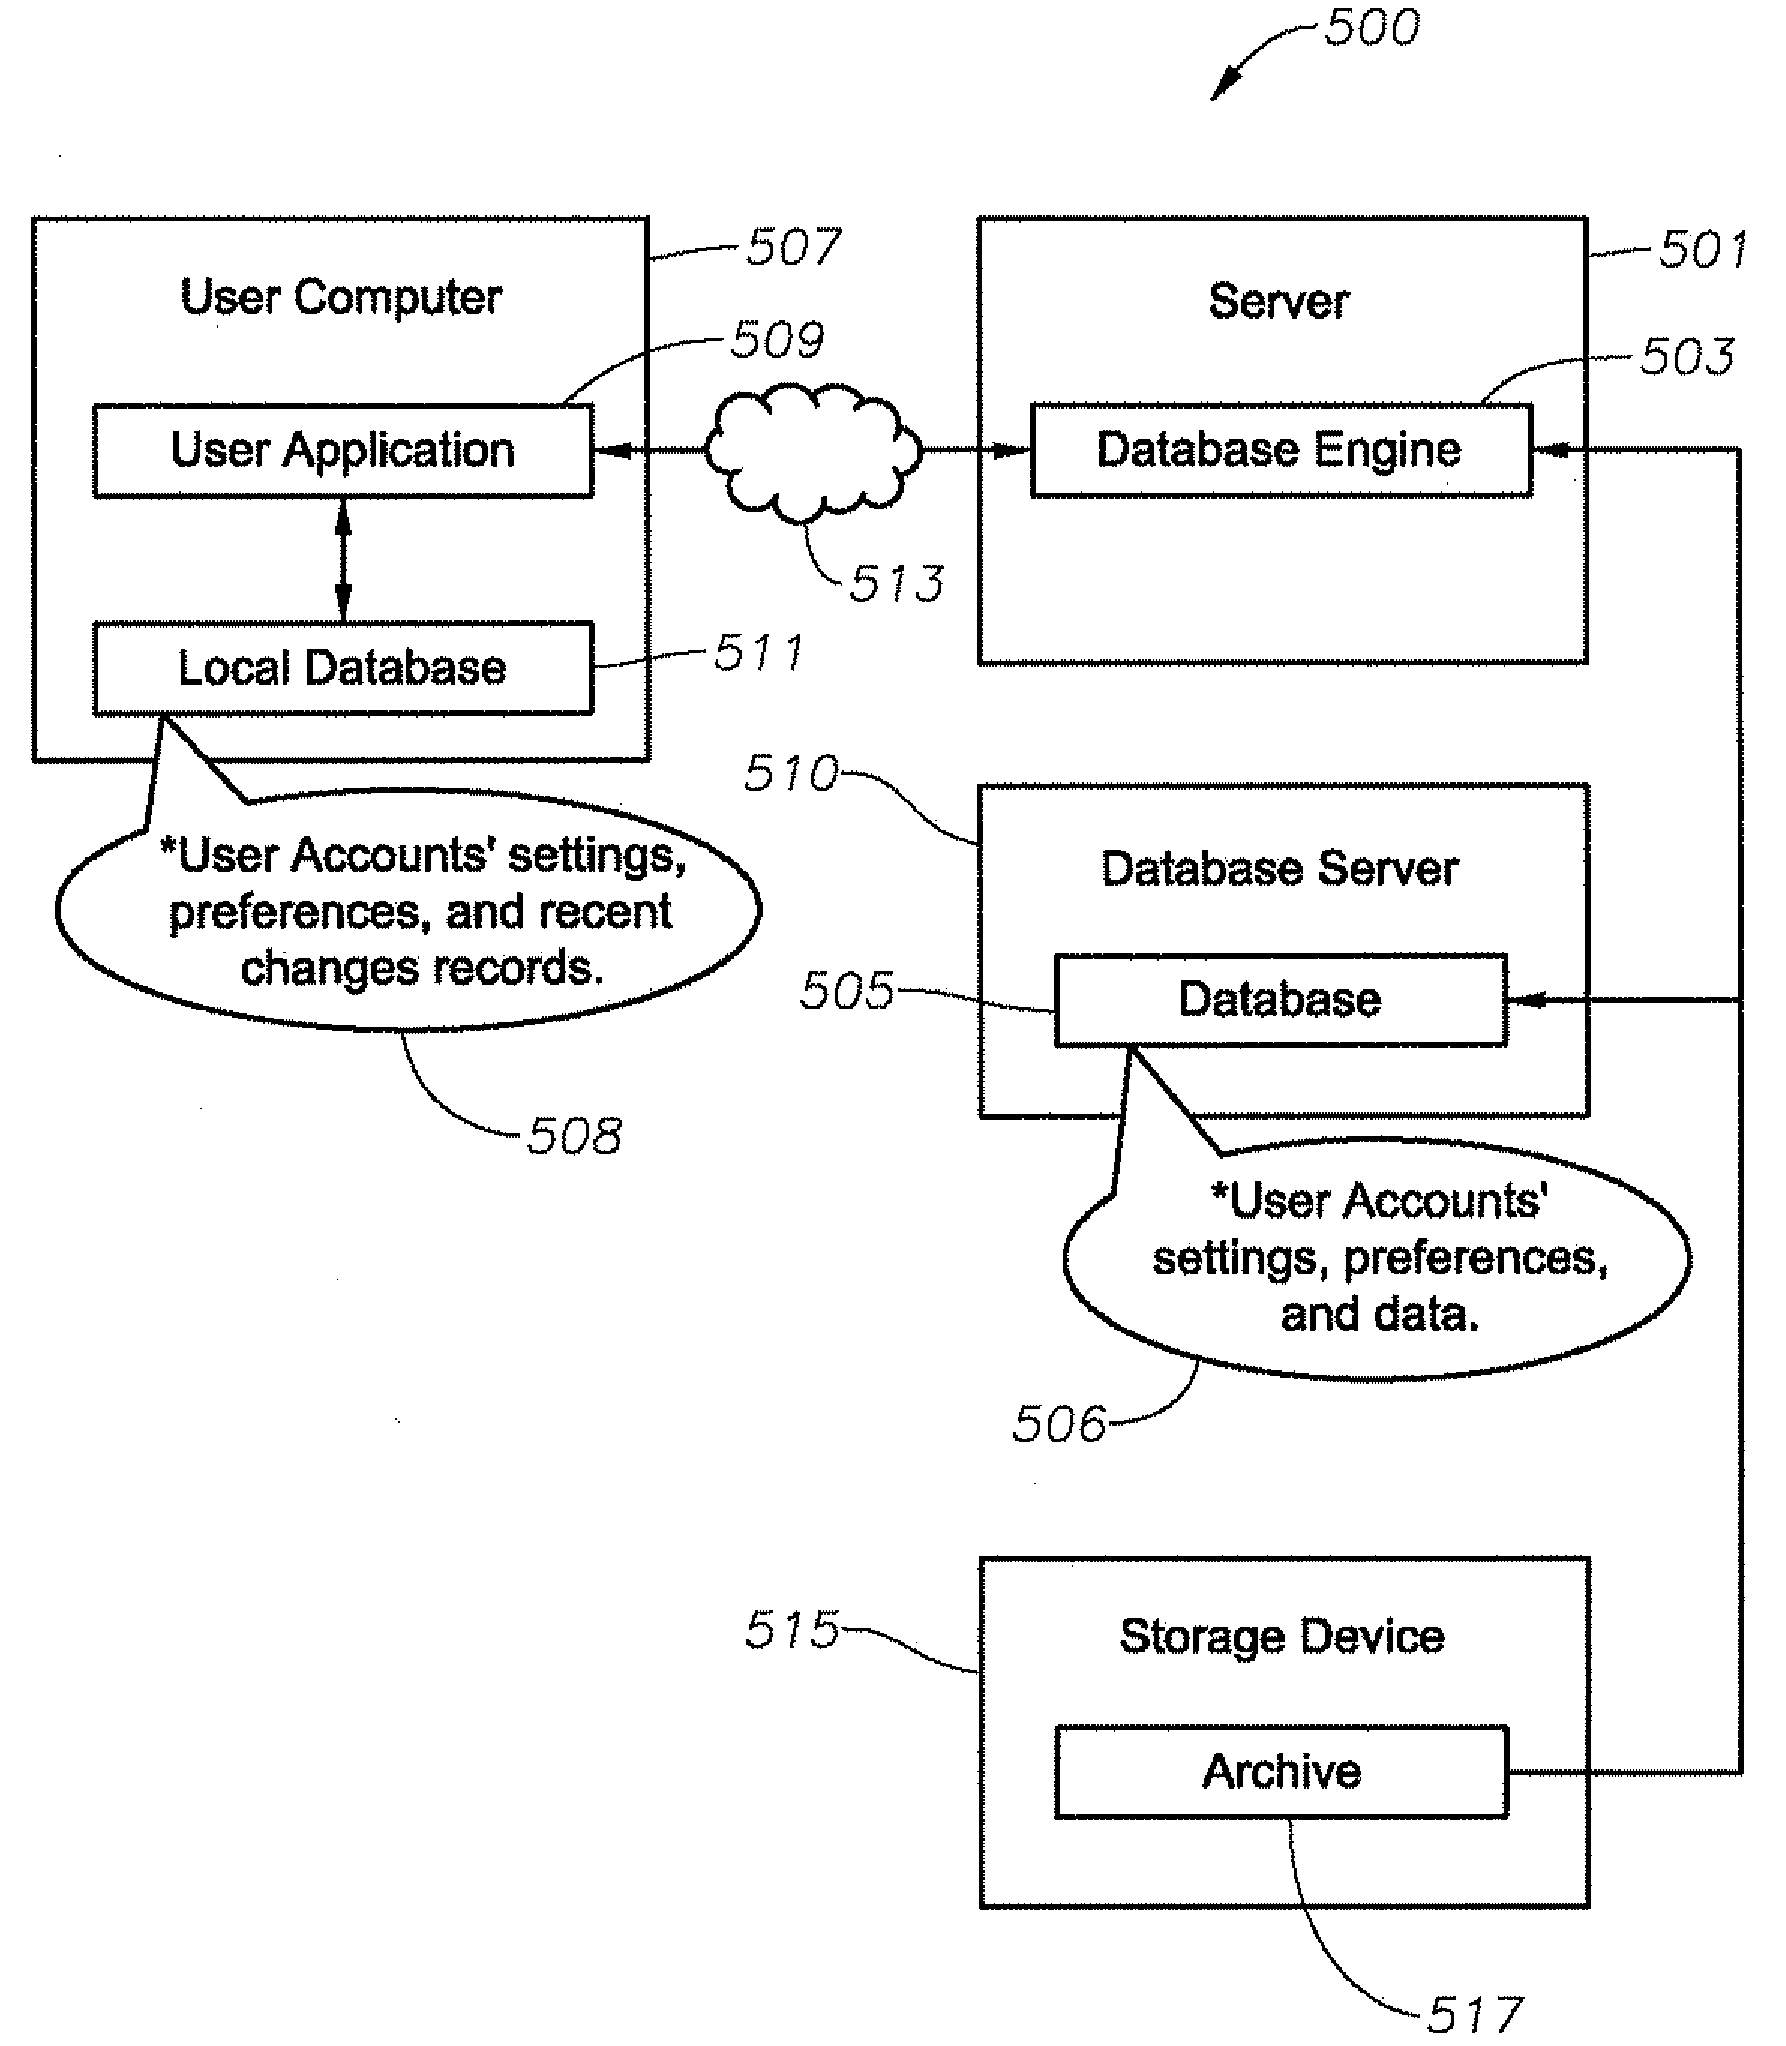 Machine, Program Product, And Computer-Implemented Method For File Management, Storage, And Access Utilizing A User-Selected Trigger Event